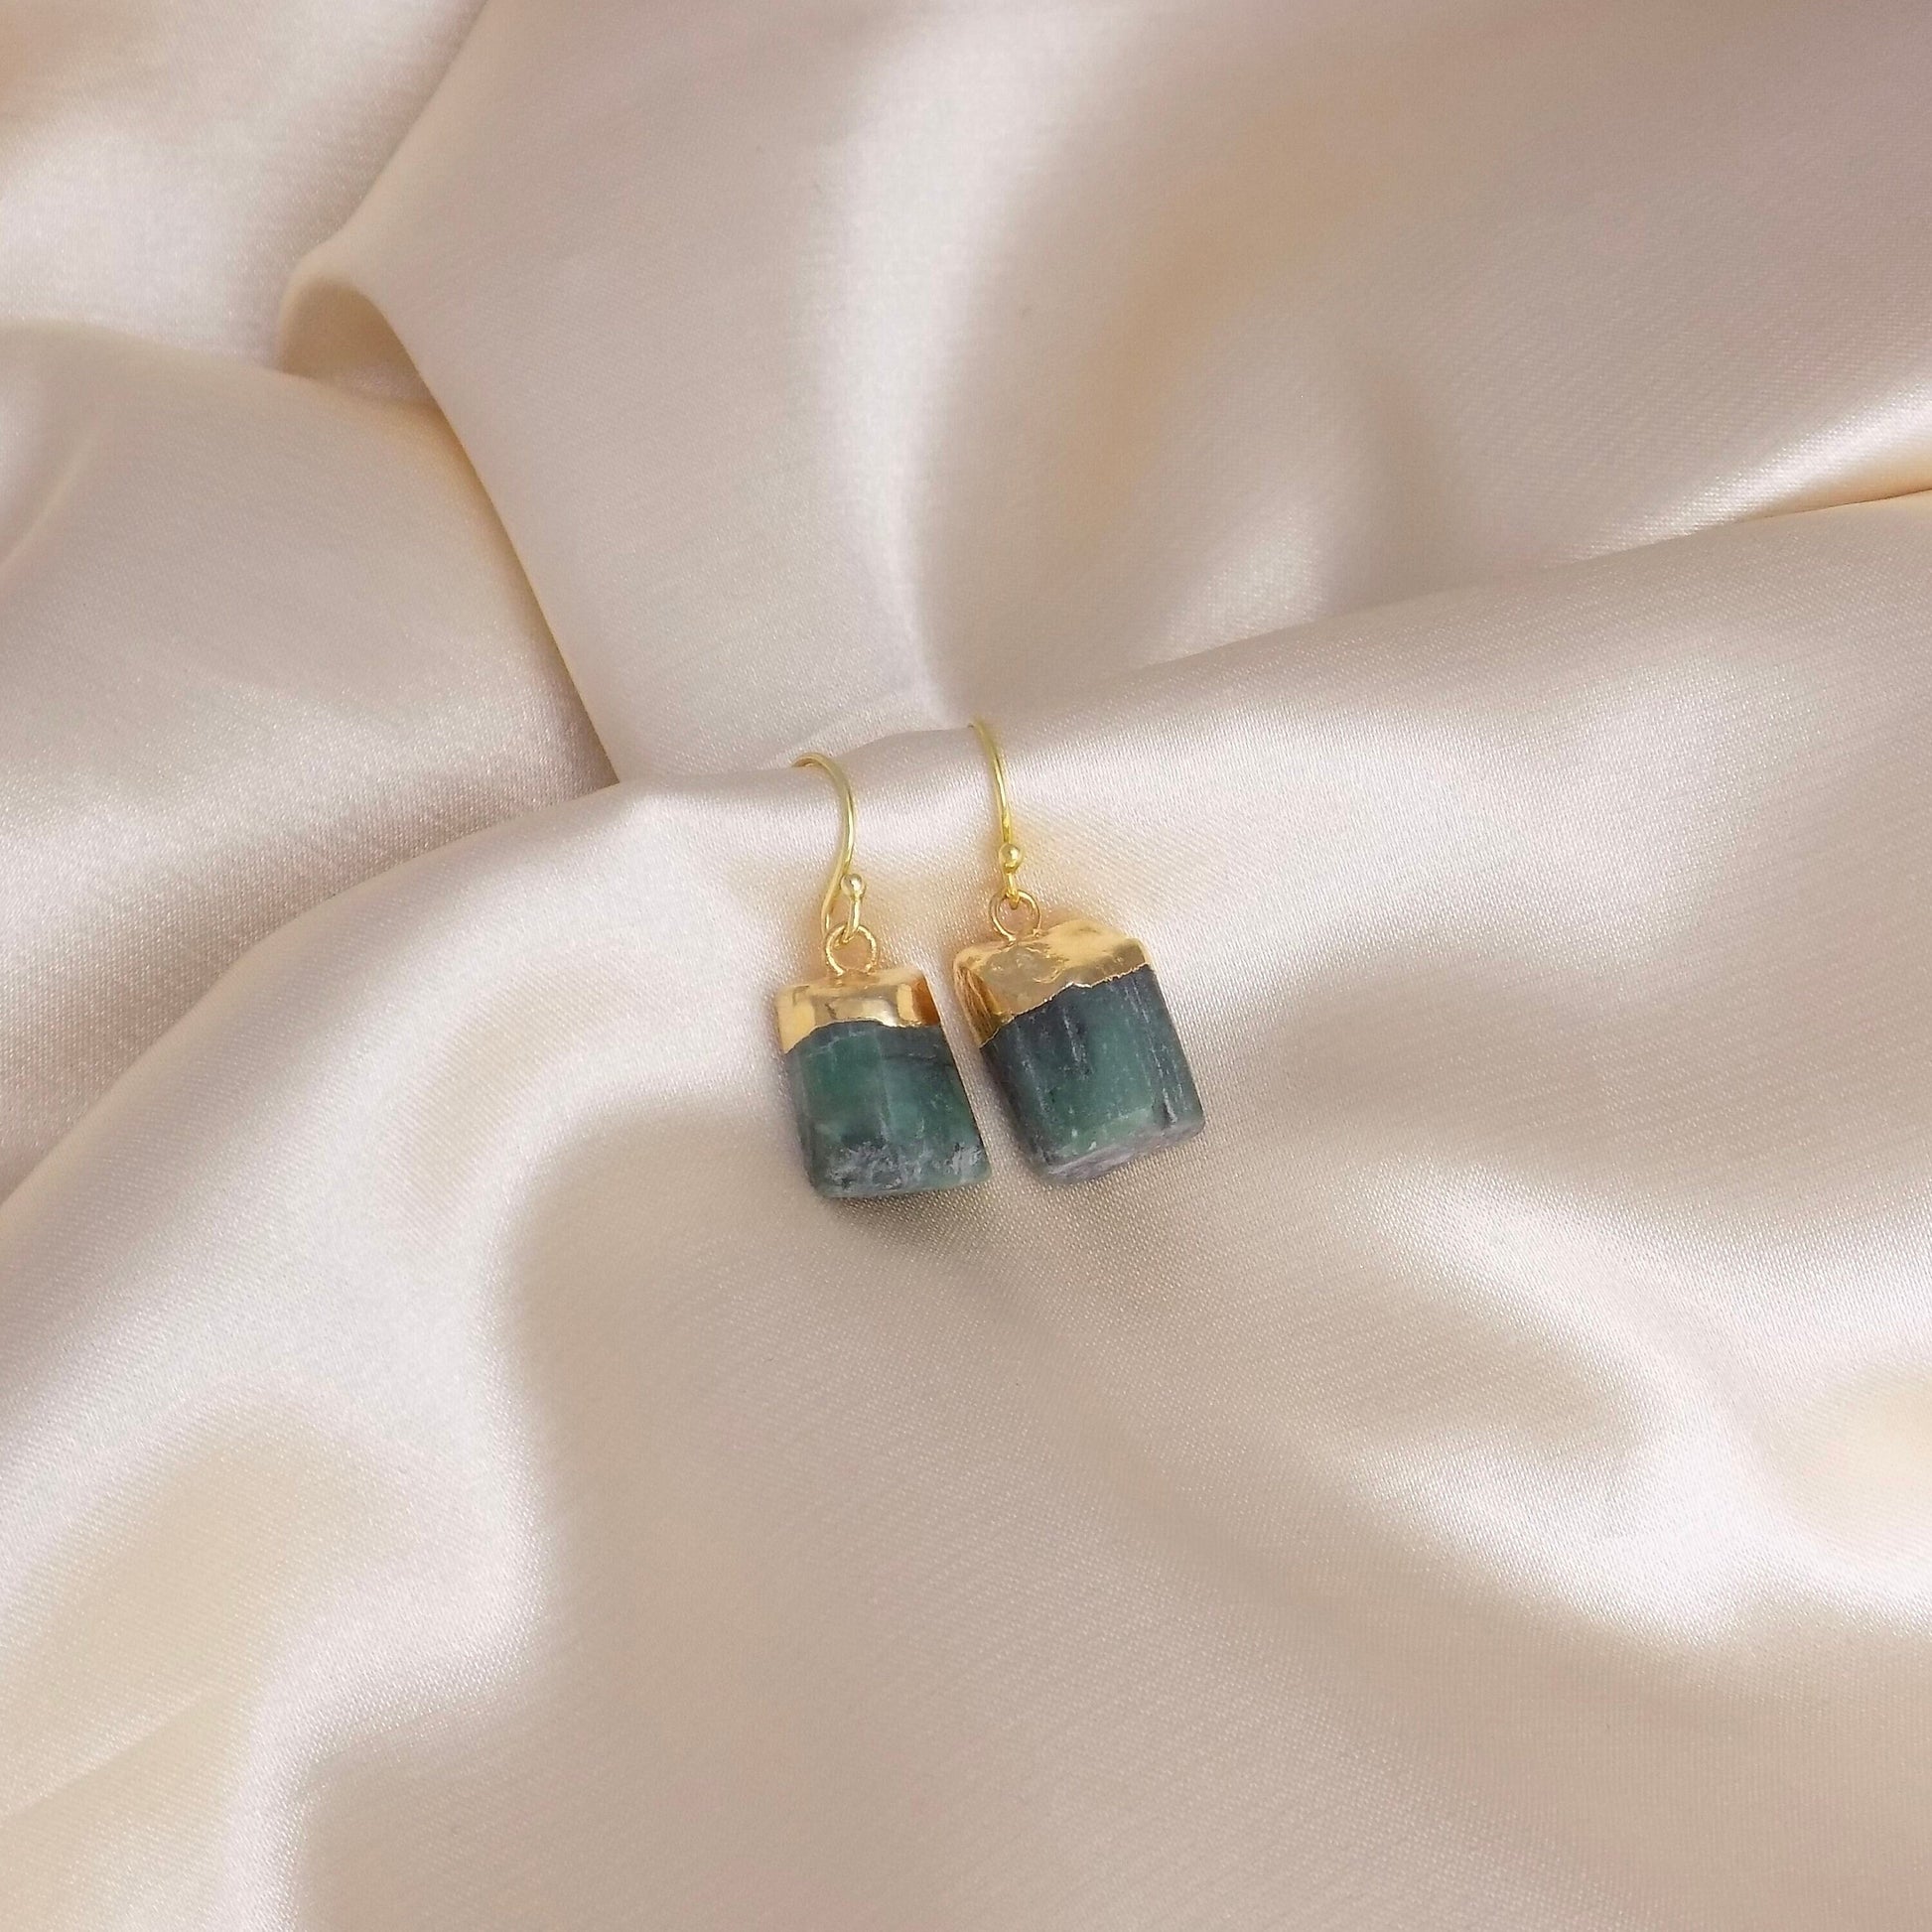 Gifts For Her, Raw Green Emerald Drop Earrings Gold Dipped, Natural Genuine Emerald Jewelry, M7-39